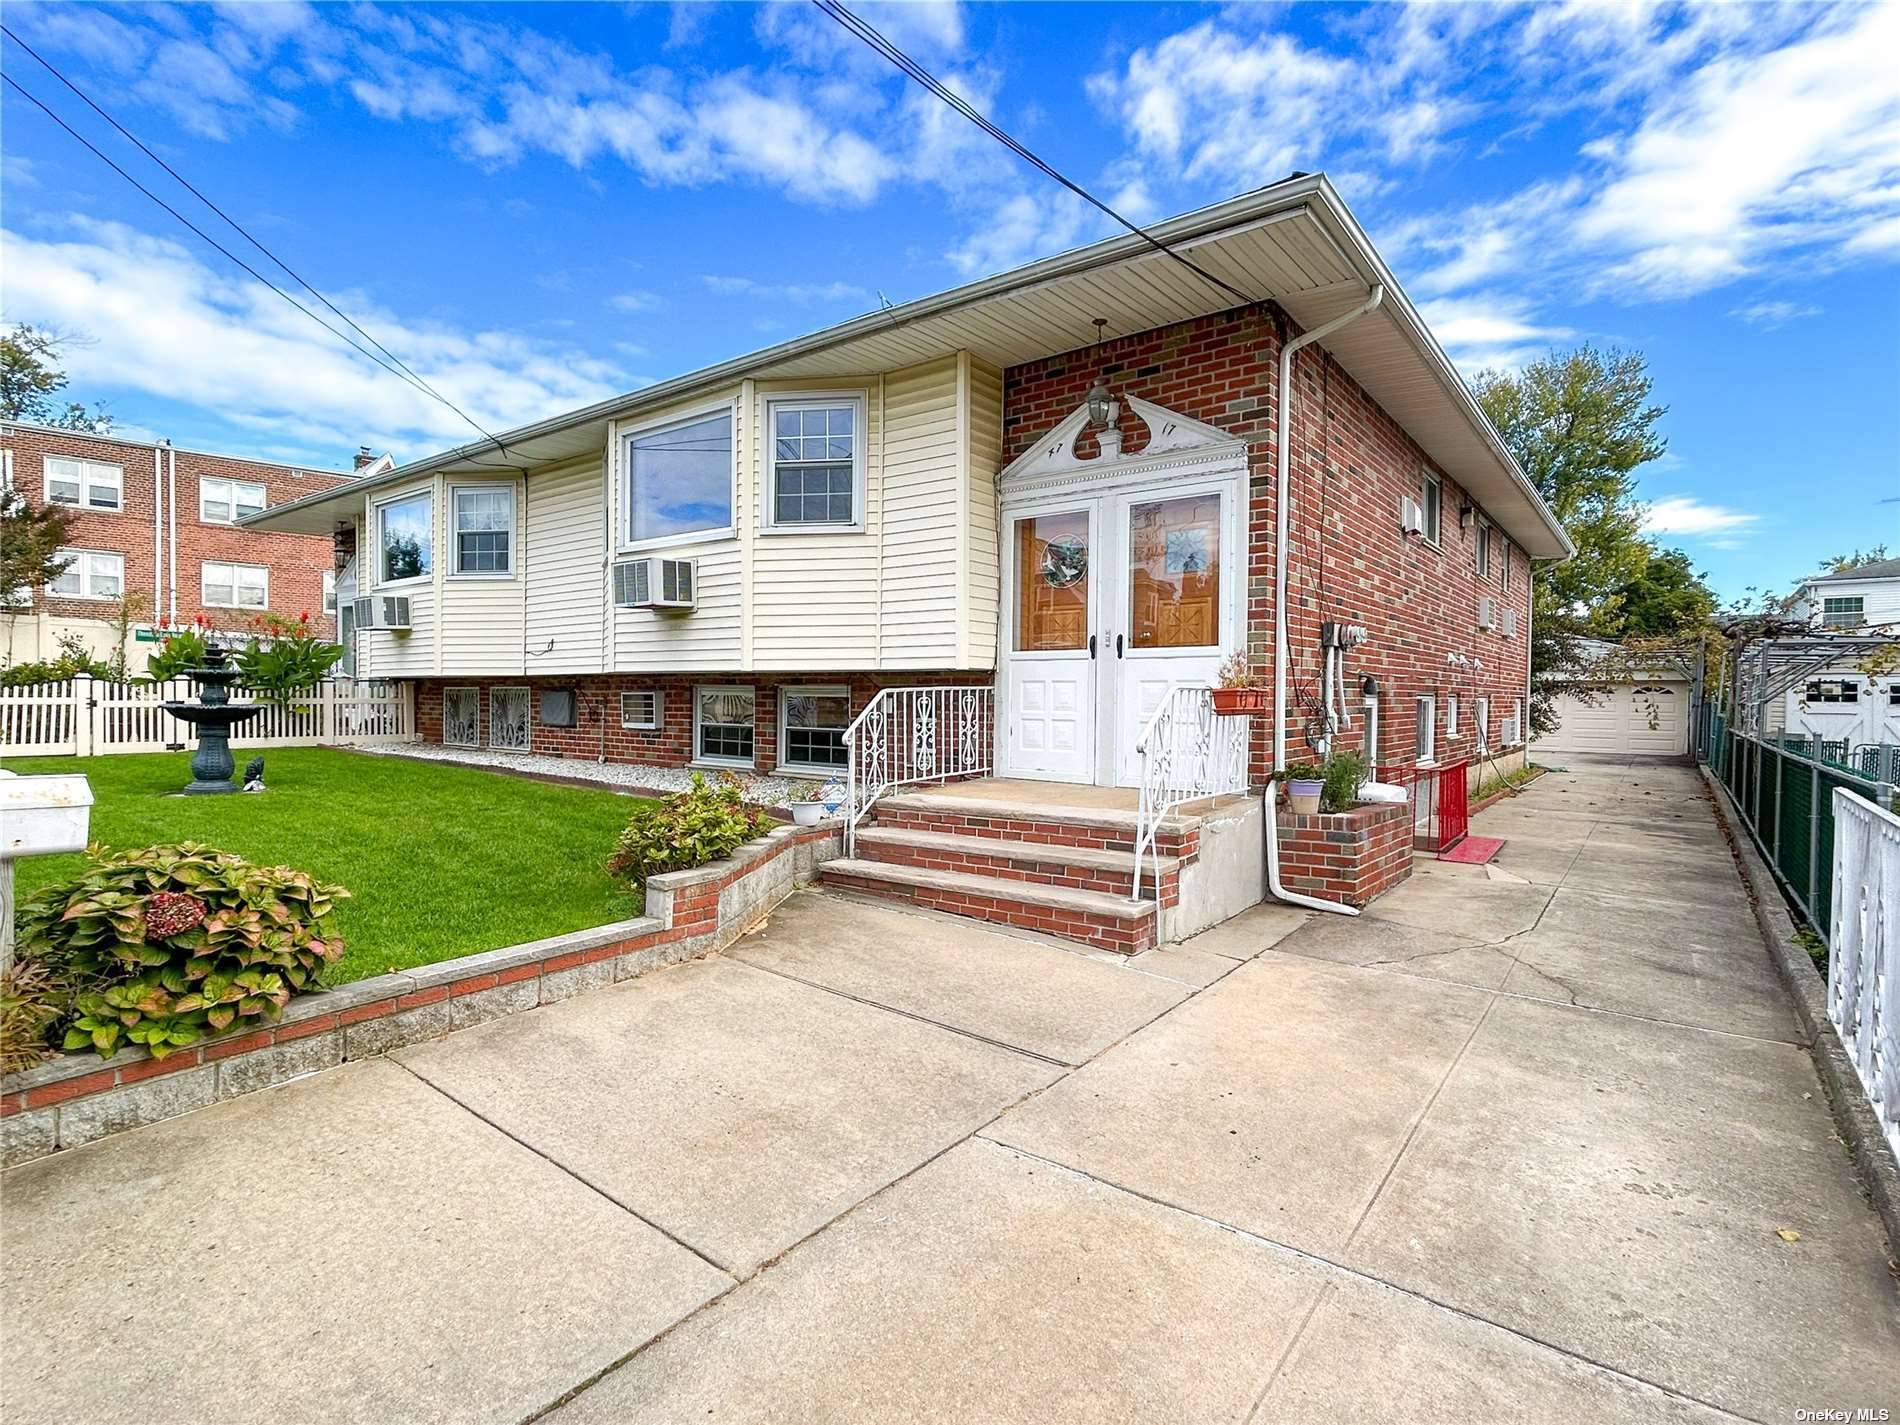 Super rare find in Flushing on a quiet dead end street ; 2 lots, zoning R3 2 ; younger semi attached 2 family home on an oversized 38' x 125' ...